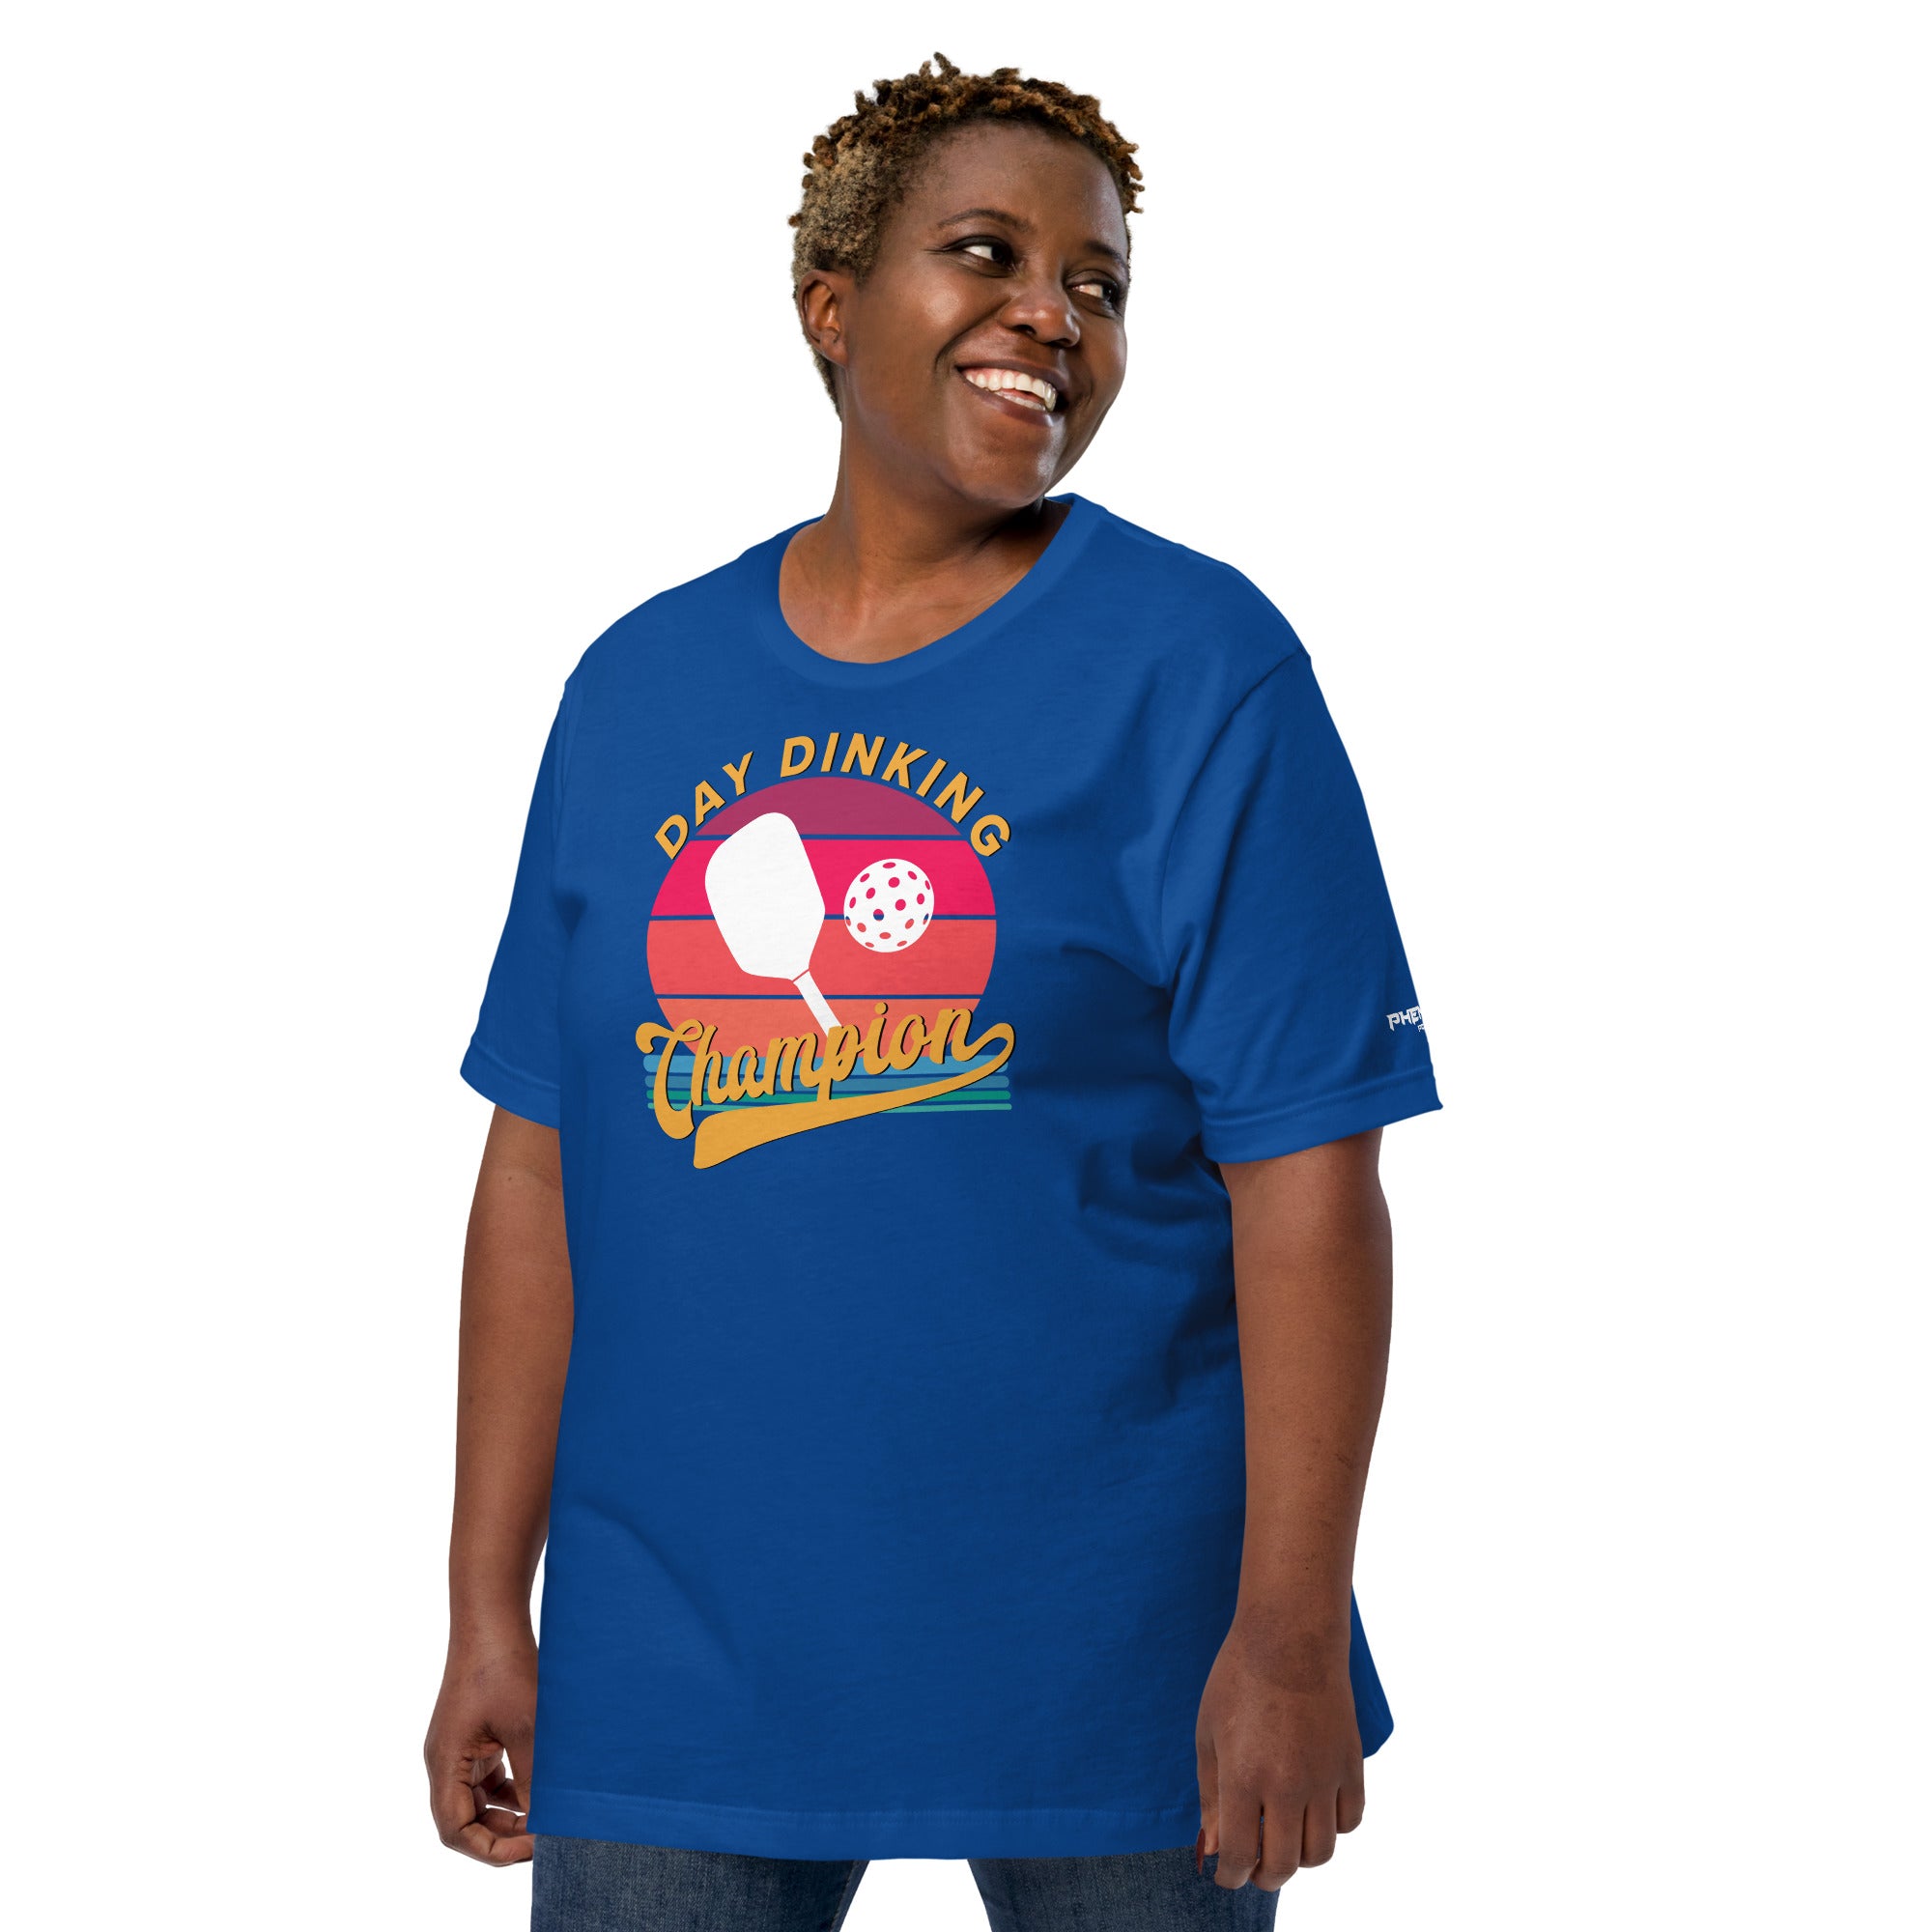 smiling plus sized woman wearing royal blue day dinking champion retro inspired pickleball shirt apparel left side view